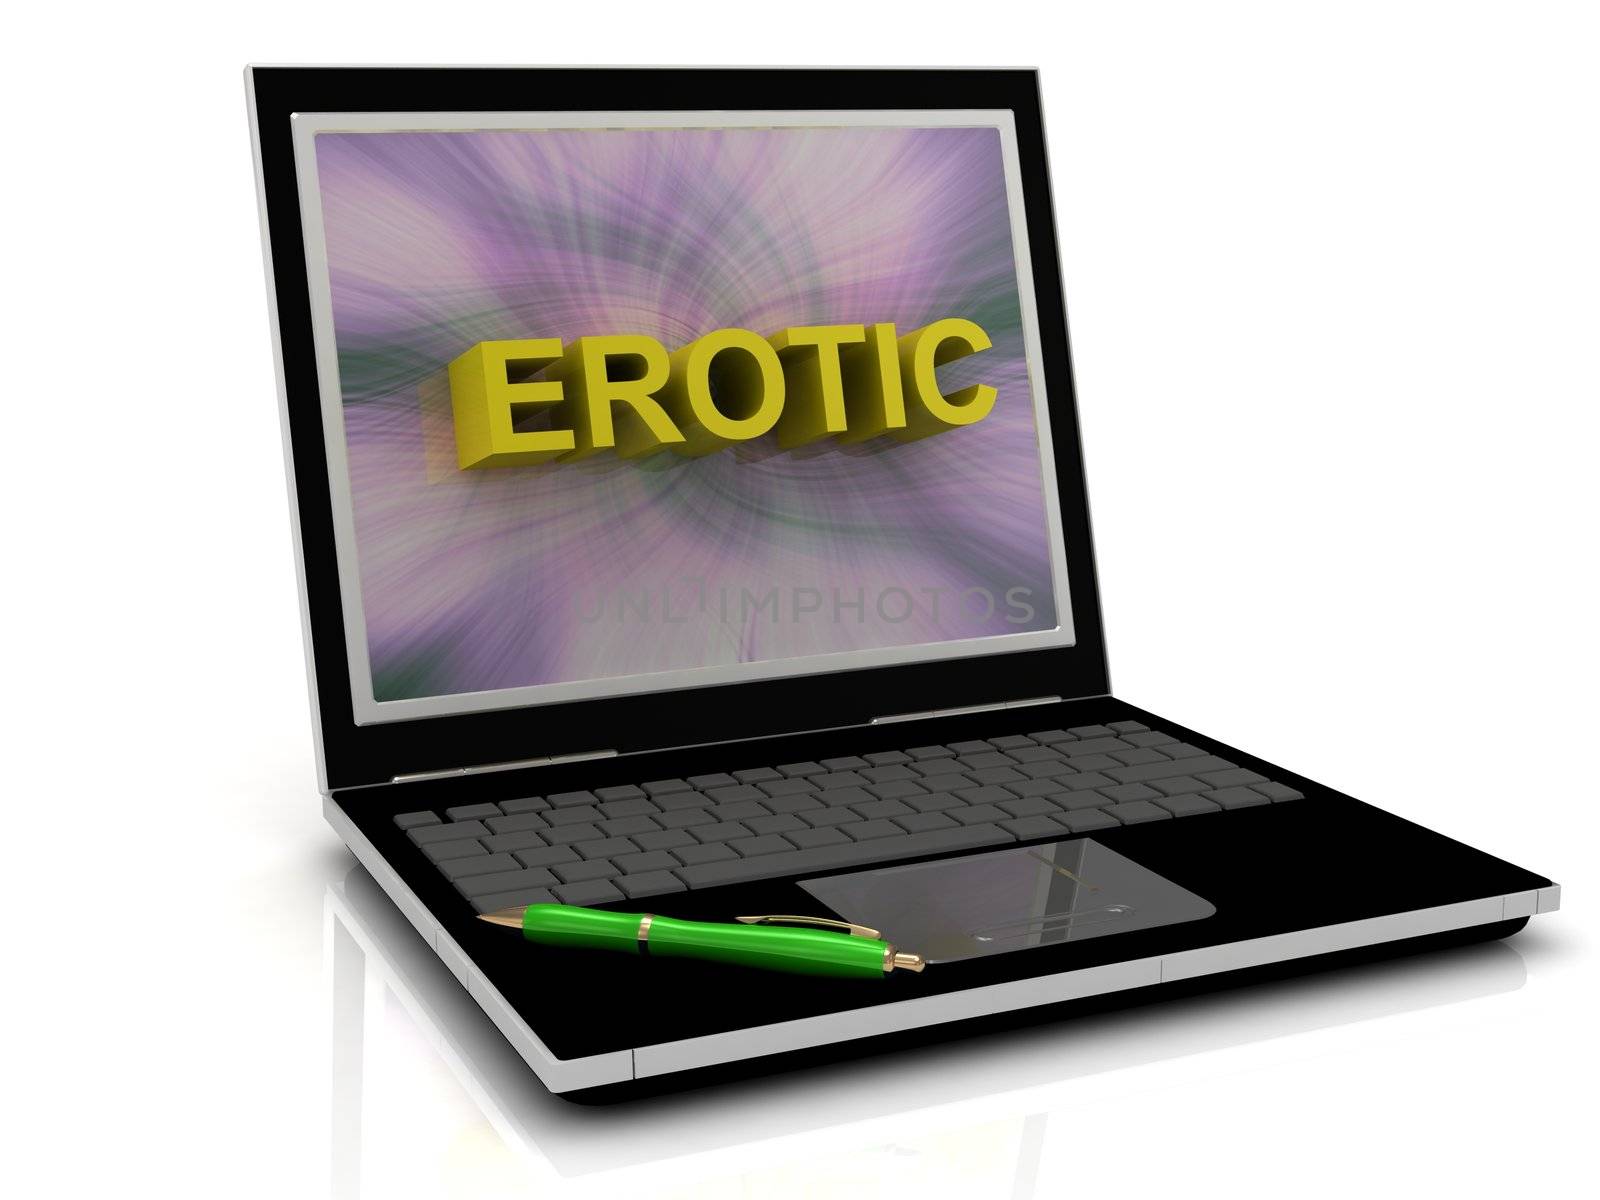 EROTIC message on laptop screen by GreenMost